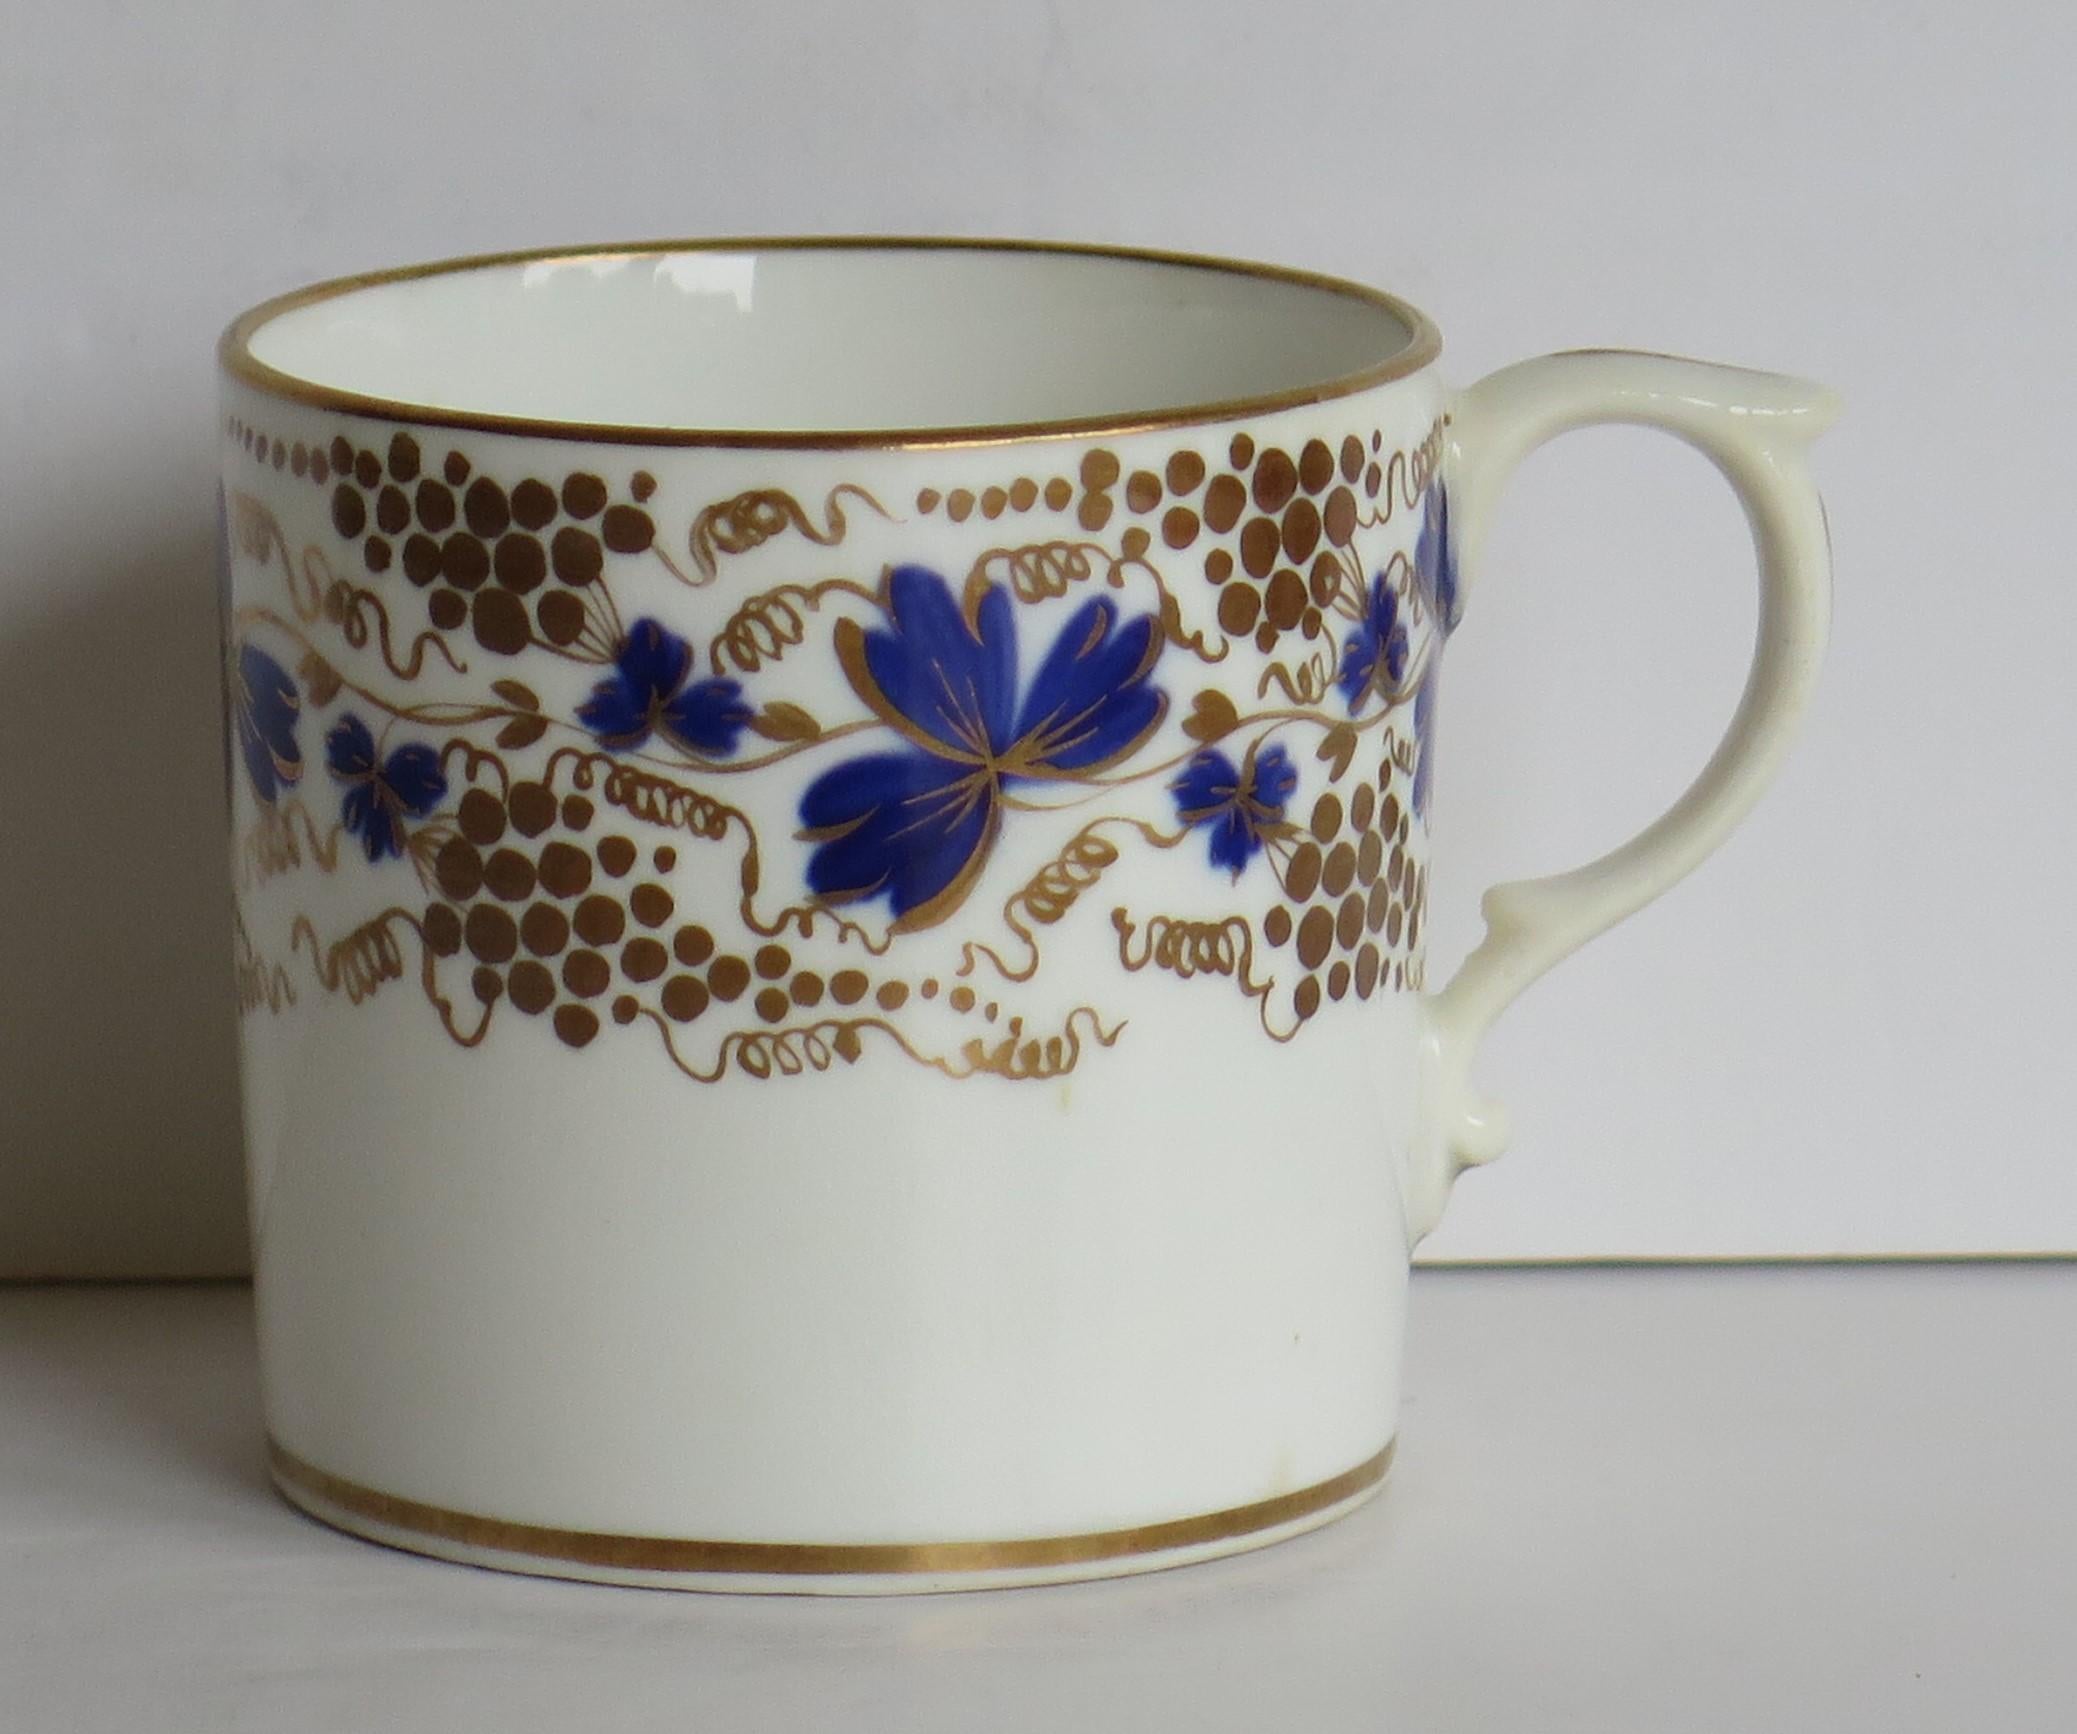 This is a finely hand painted porcelain coffee can made by the Derby factory, England, in the Georgian Regency period of the 19th century, circa 1825
 
Straight sided coffee cans were only originally made for about the first 25 years of the 19th